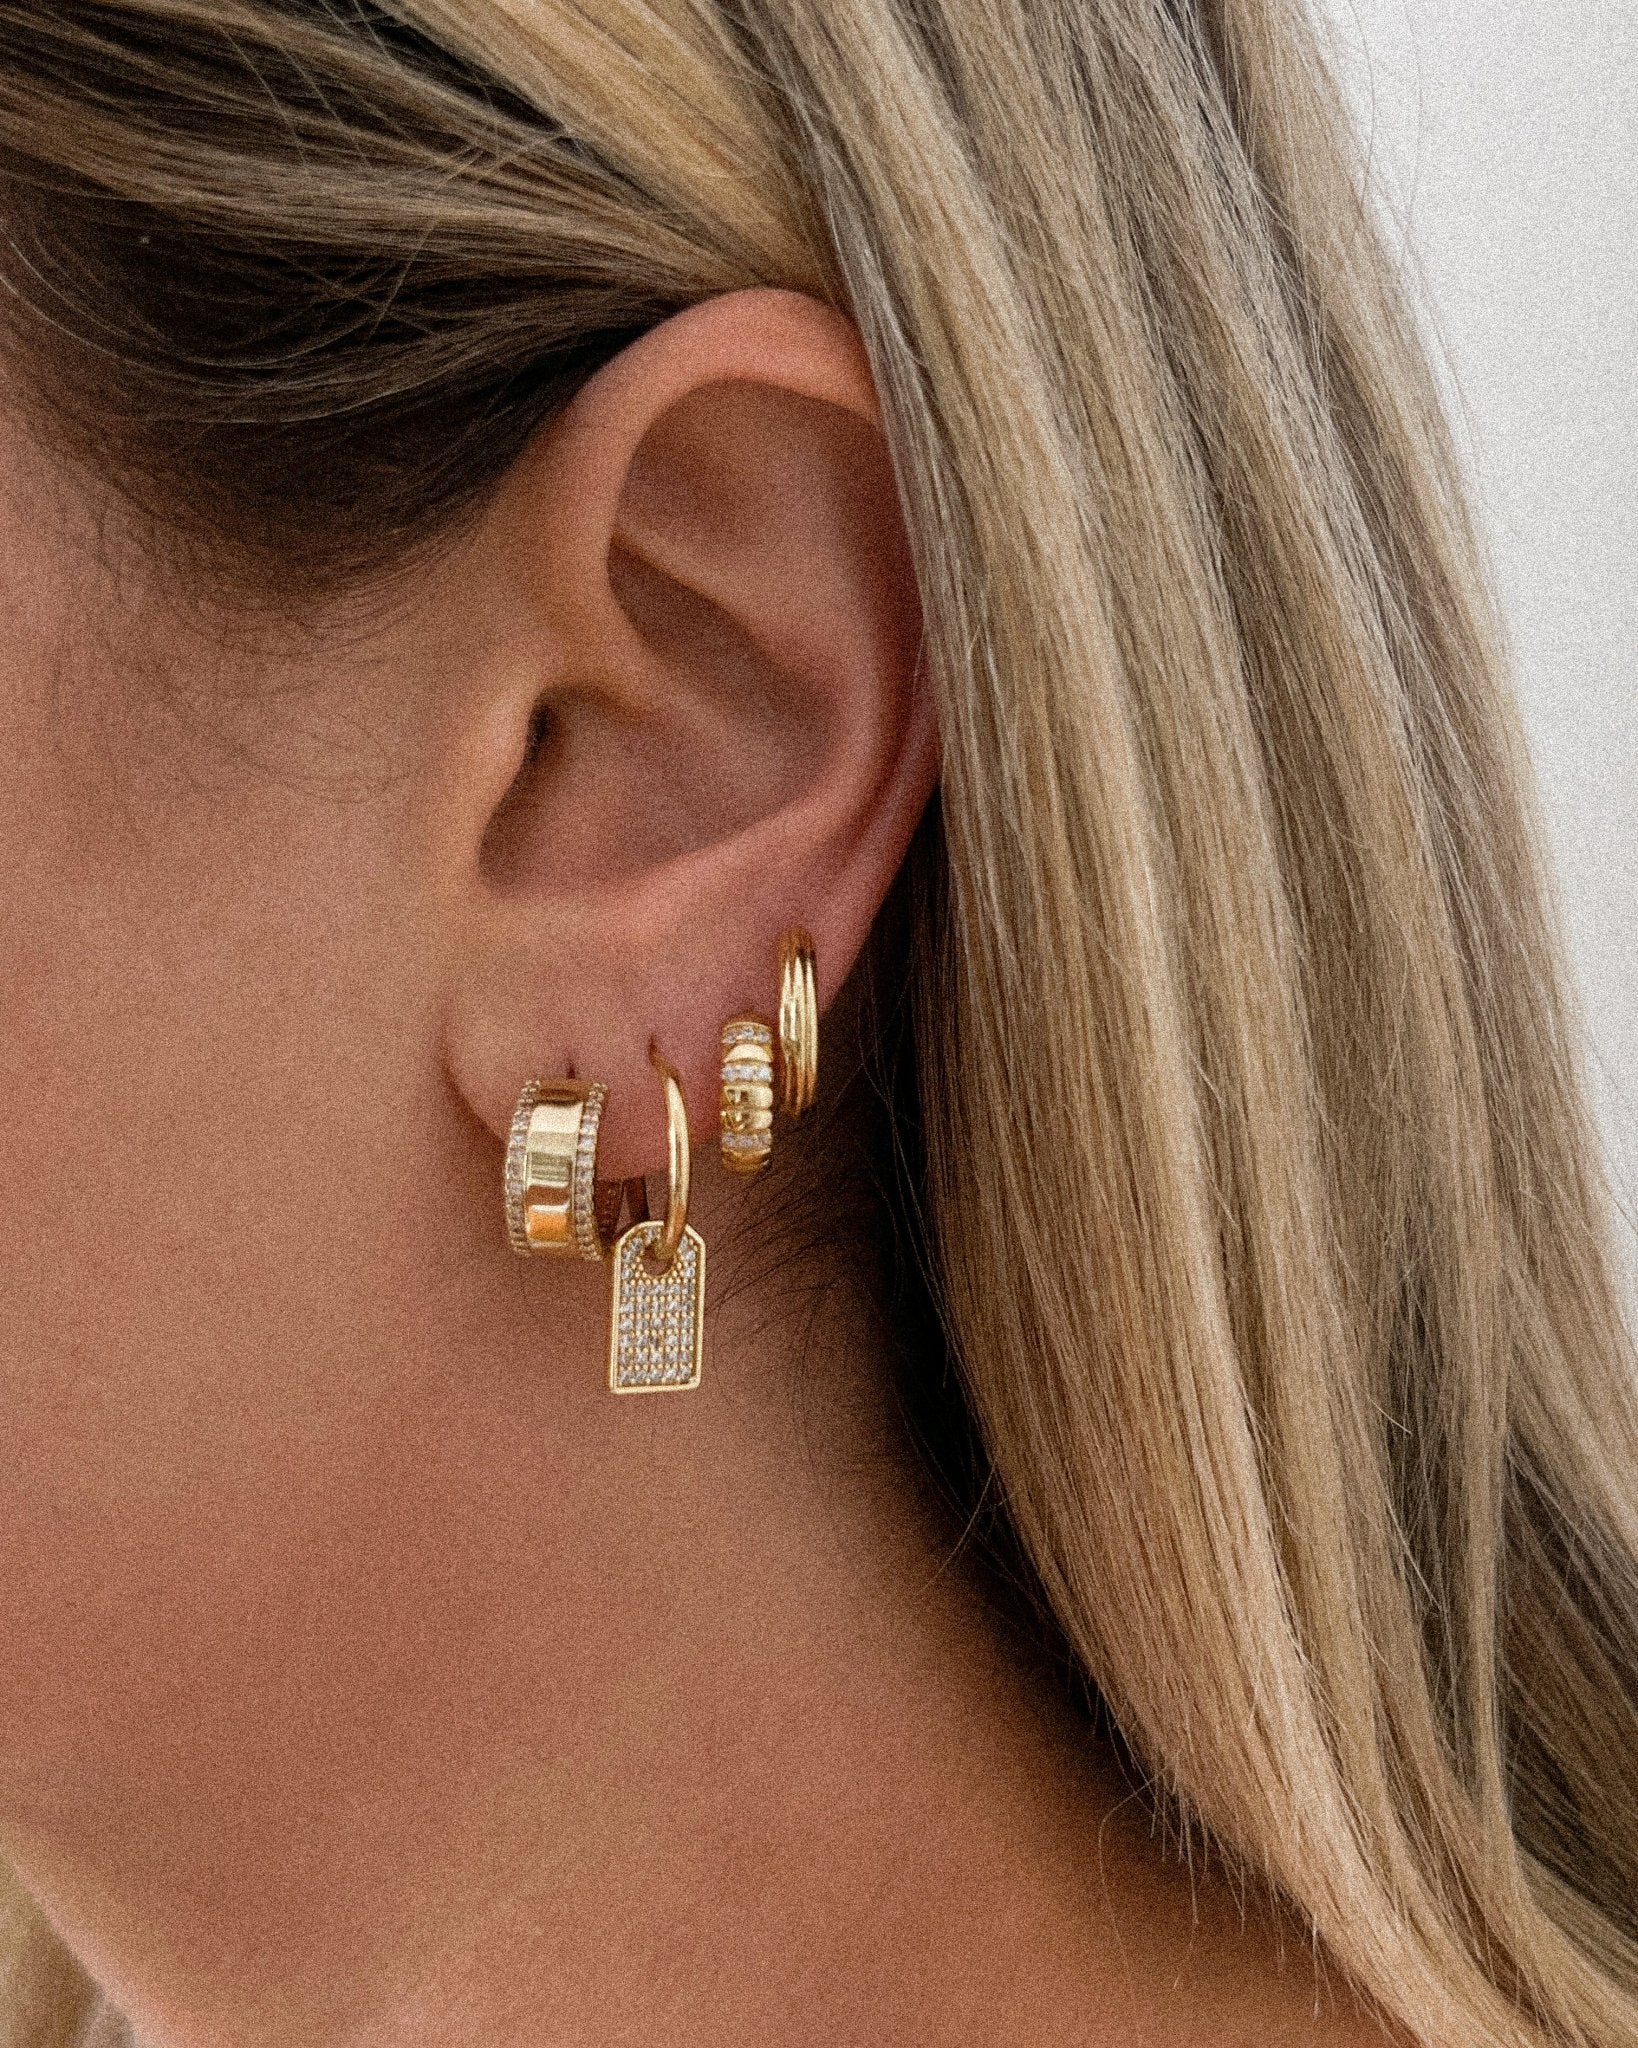 Hailee earrings - five and two jewelry